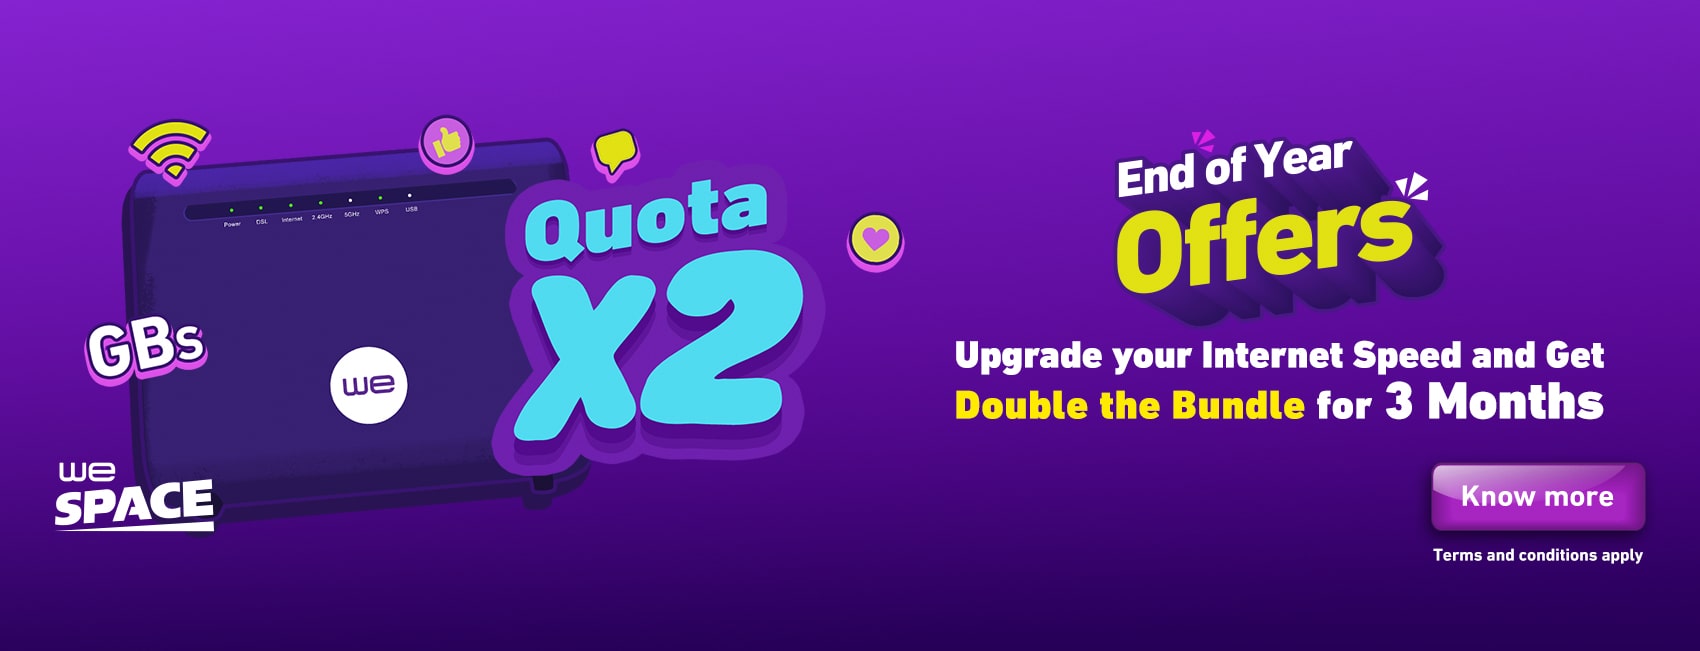 X2 quota promo for WE Space Customers